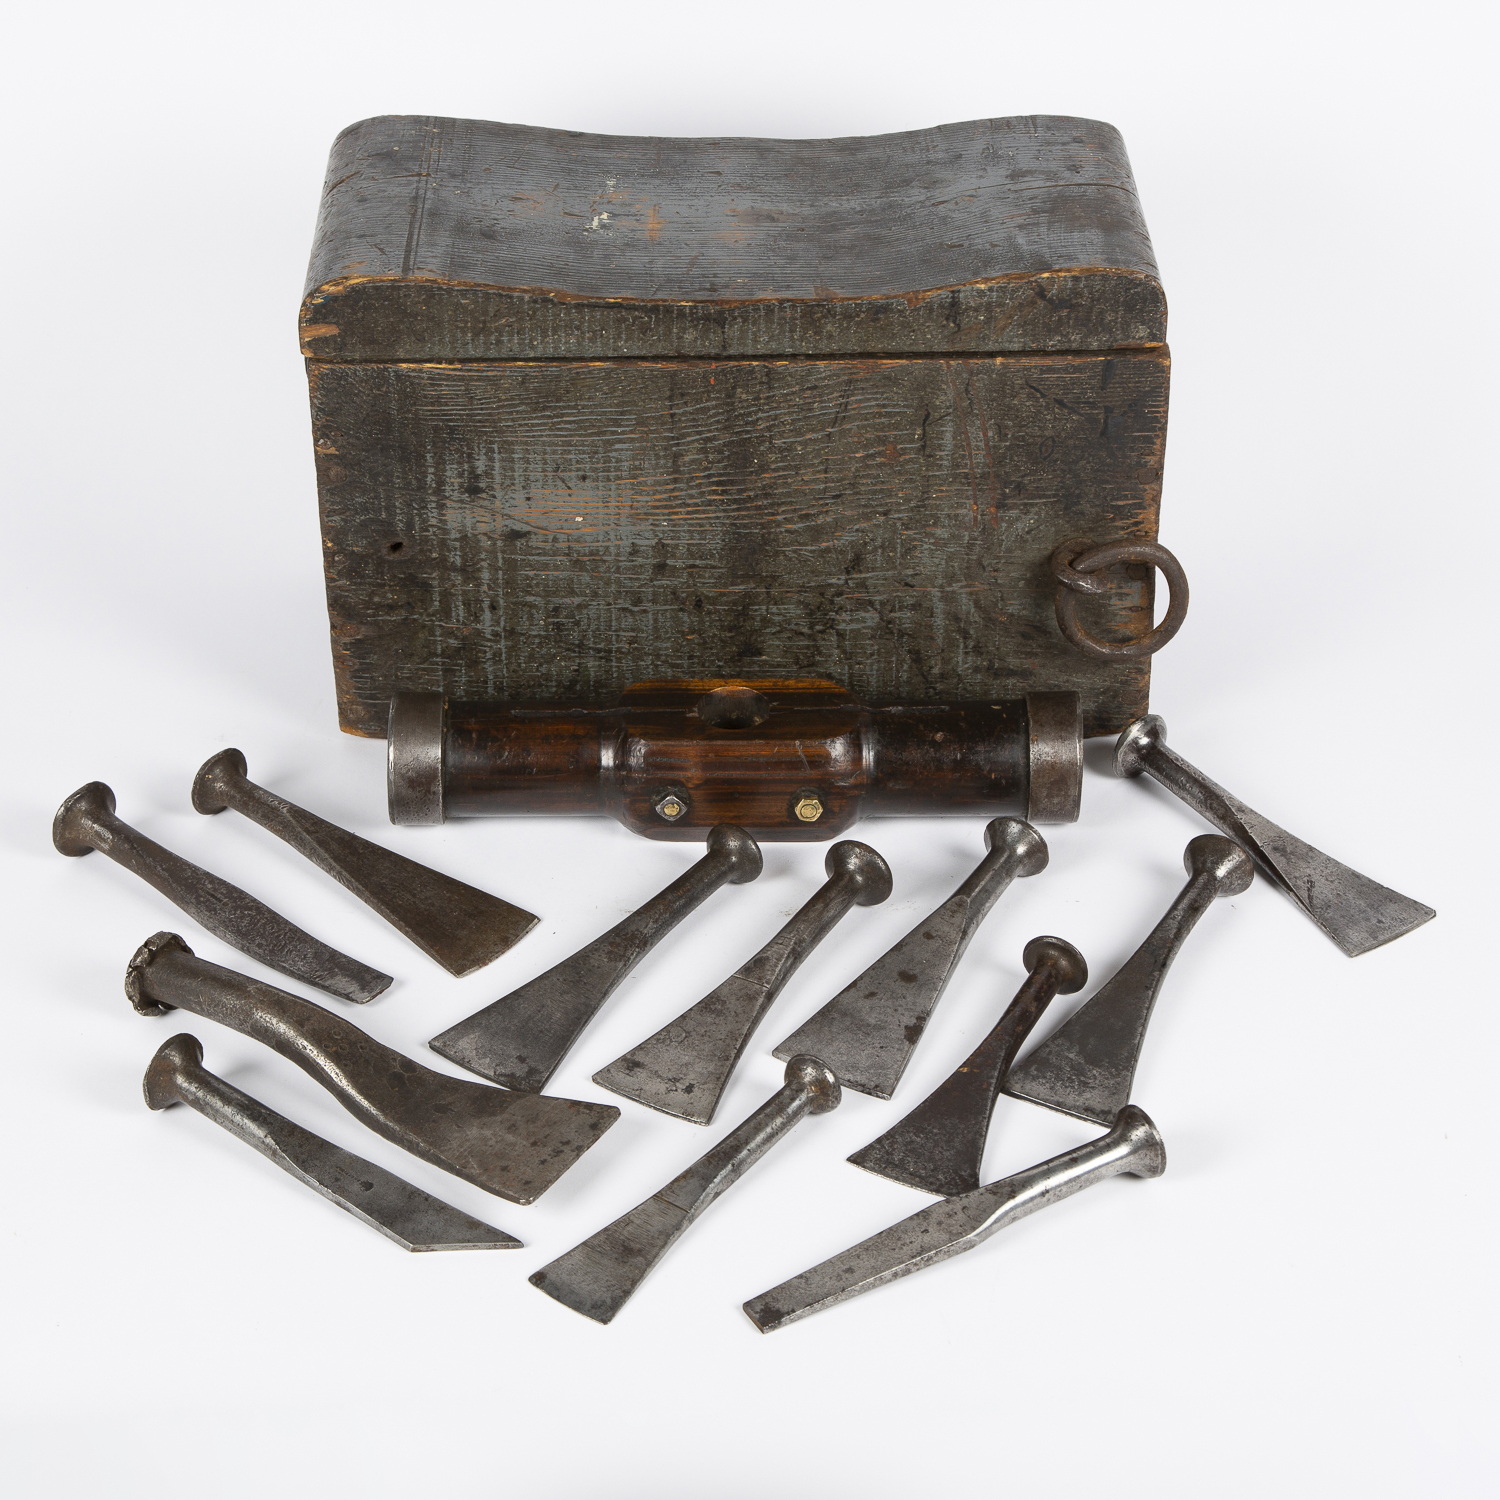 Shipwright’s calking seat, containing a mallet head and 12 steel caulking irons.